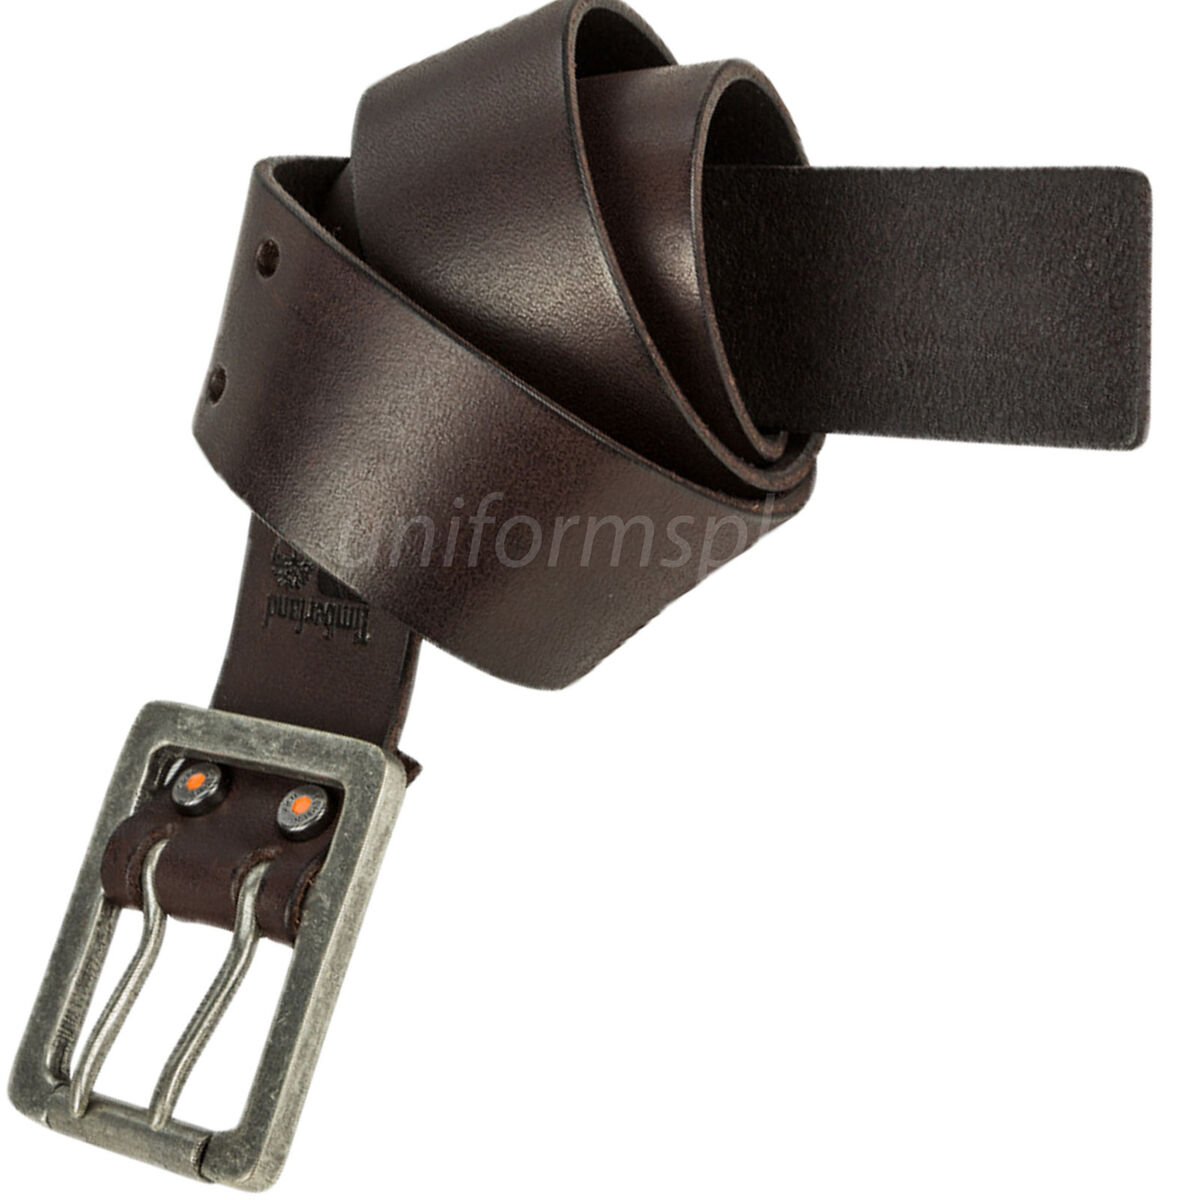 Timberland Pro Leather Belt Mens Double Prong 42mm Belts Black, Brown BP0007